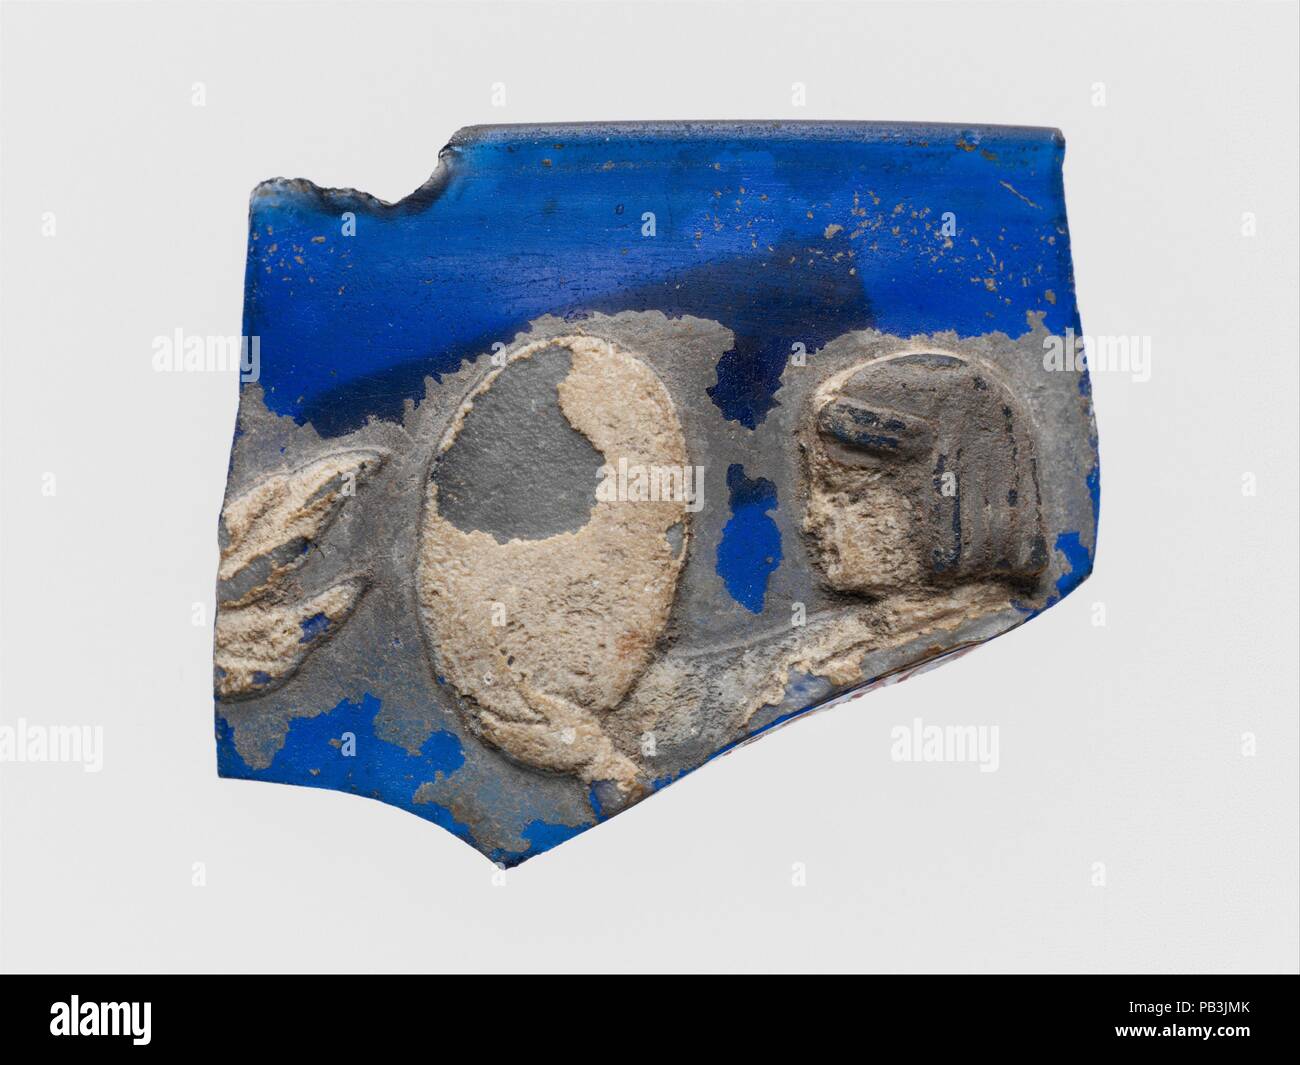 Glass cameo cup fragment. Culture: Roman. Dimensions: Overall: 1 1/4 x 1 7/16 in. (3.2 x 3.7 cm). Date: end of 1st century B.C-beginning of 1st century A.D..  Translucent cobalt blue with overlays in opaque white and translucent dark blue.  Vertical rim with everted lip and beveled inner edge; cylindrical body with slightly convex curving side.  On interior, horizontal groove below rim; on exterior, in relief female figure in white, probably standing, facing left and holding up in front of her in both hands a large oval object, perhaps a drum or tambourine; her head is in profile with her hair Stock Photo